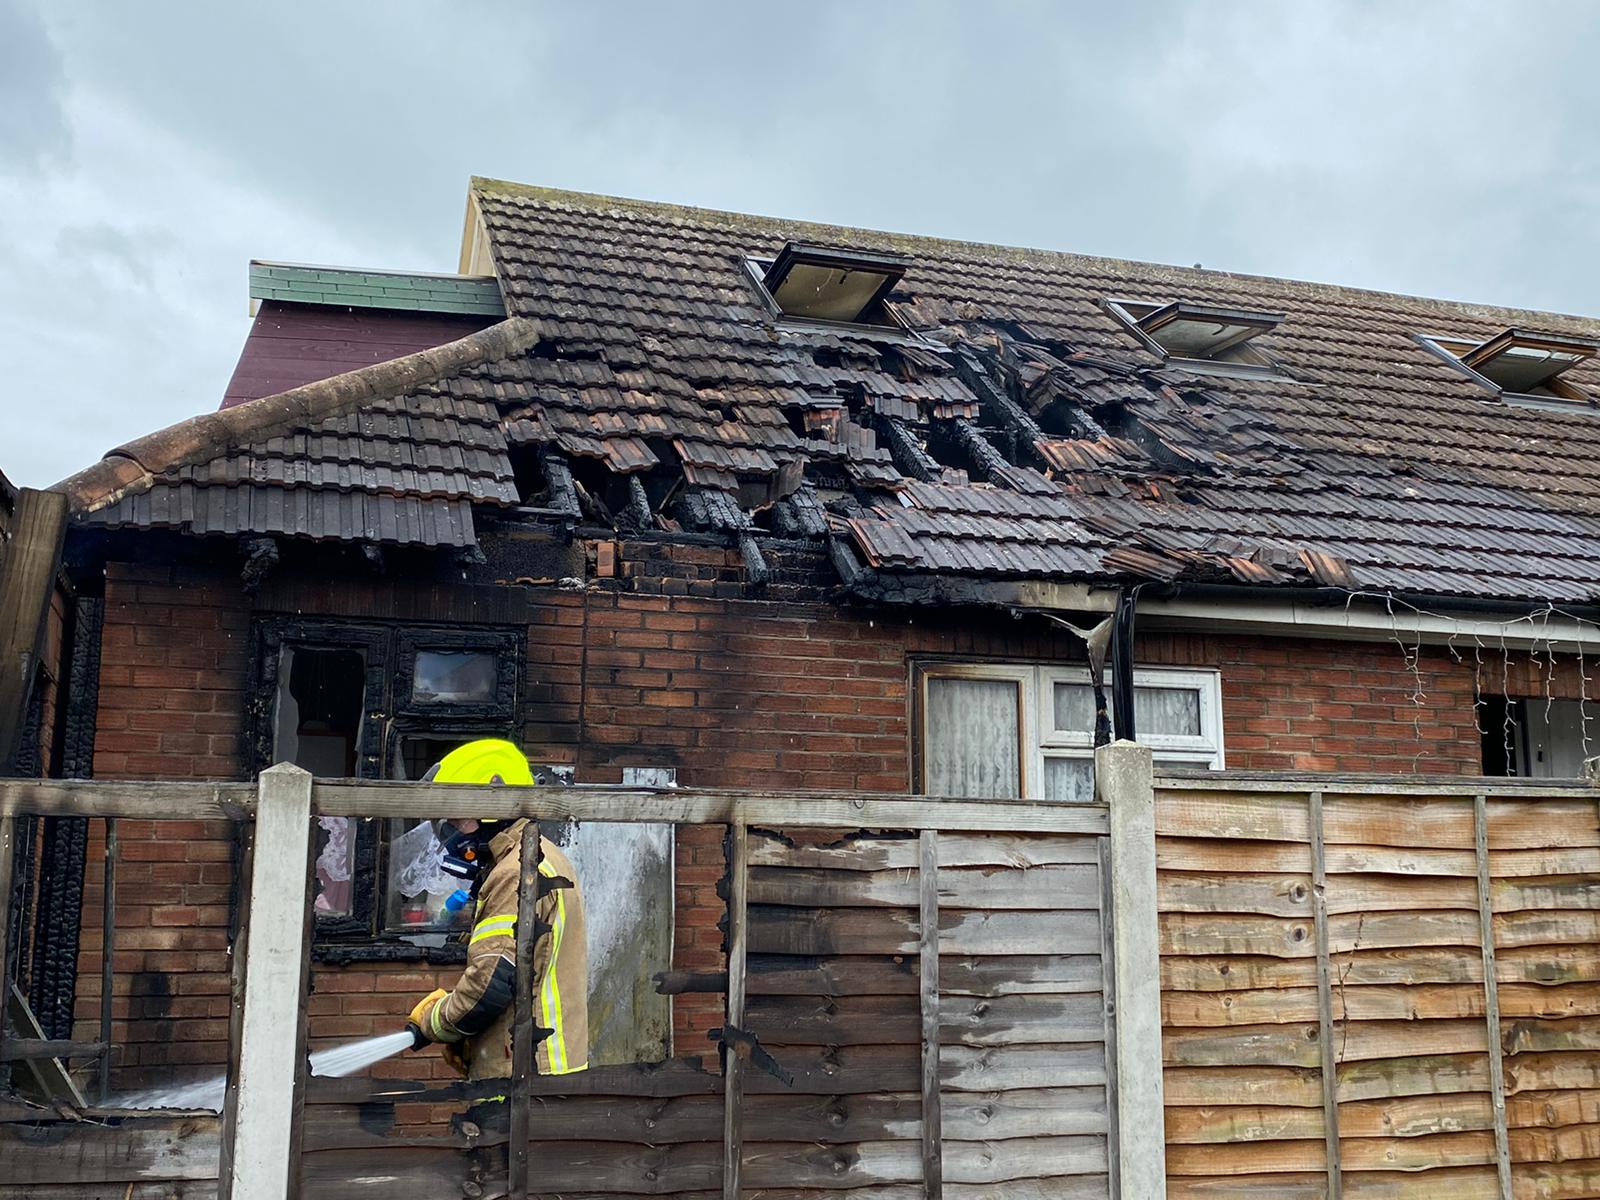 Cavendish Avenue fire saw onlookers storm in to save animals